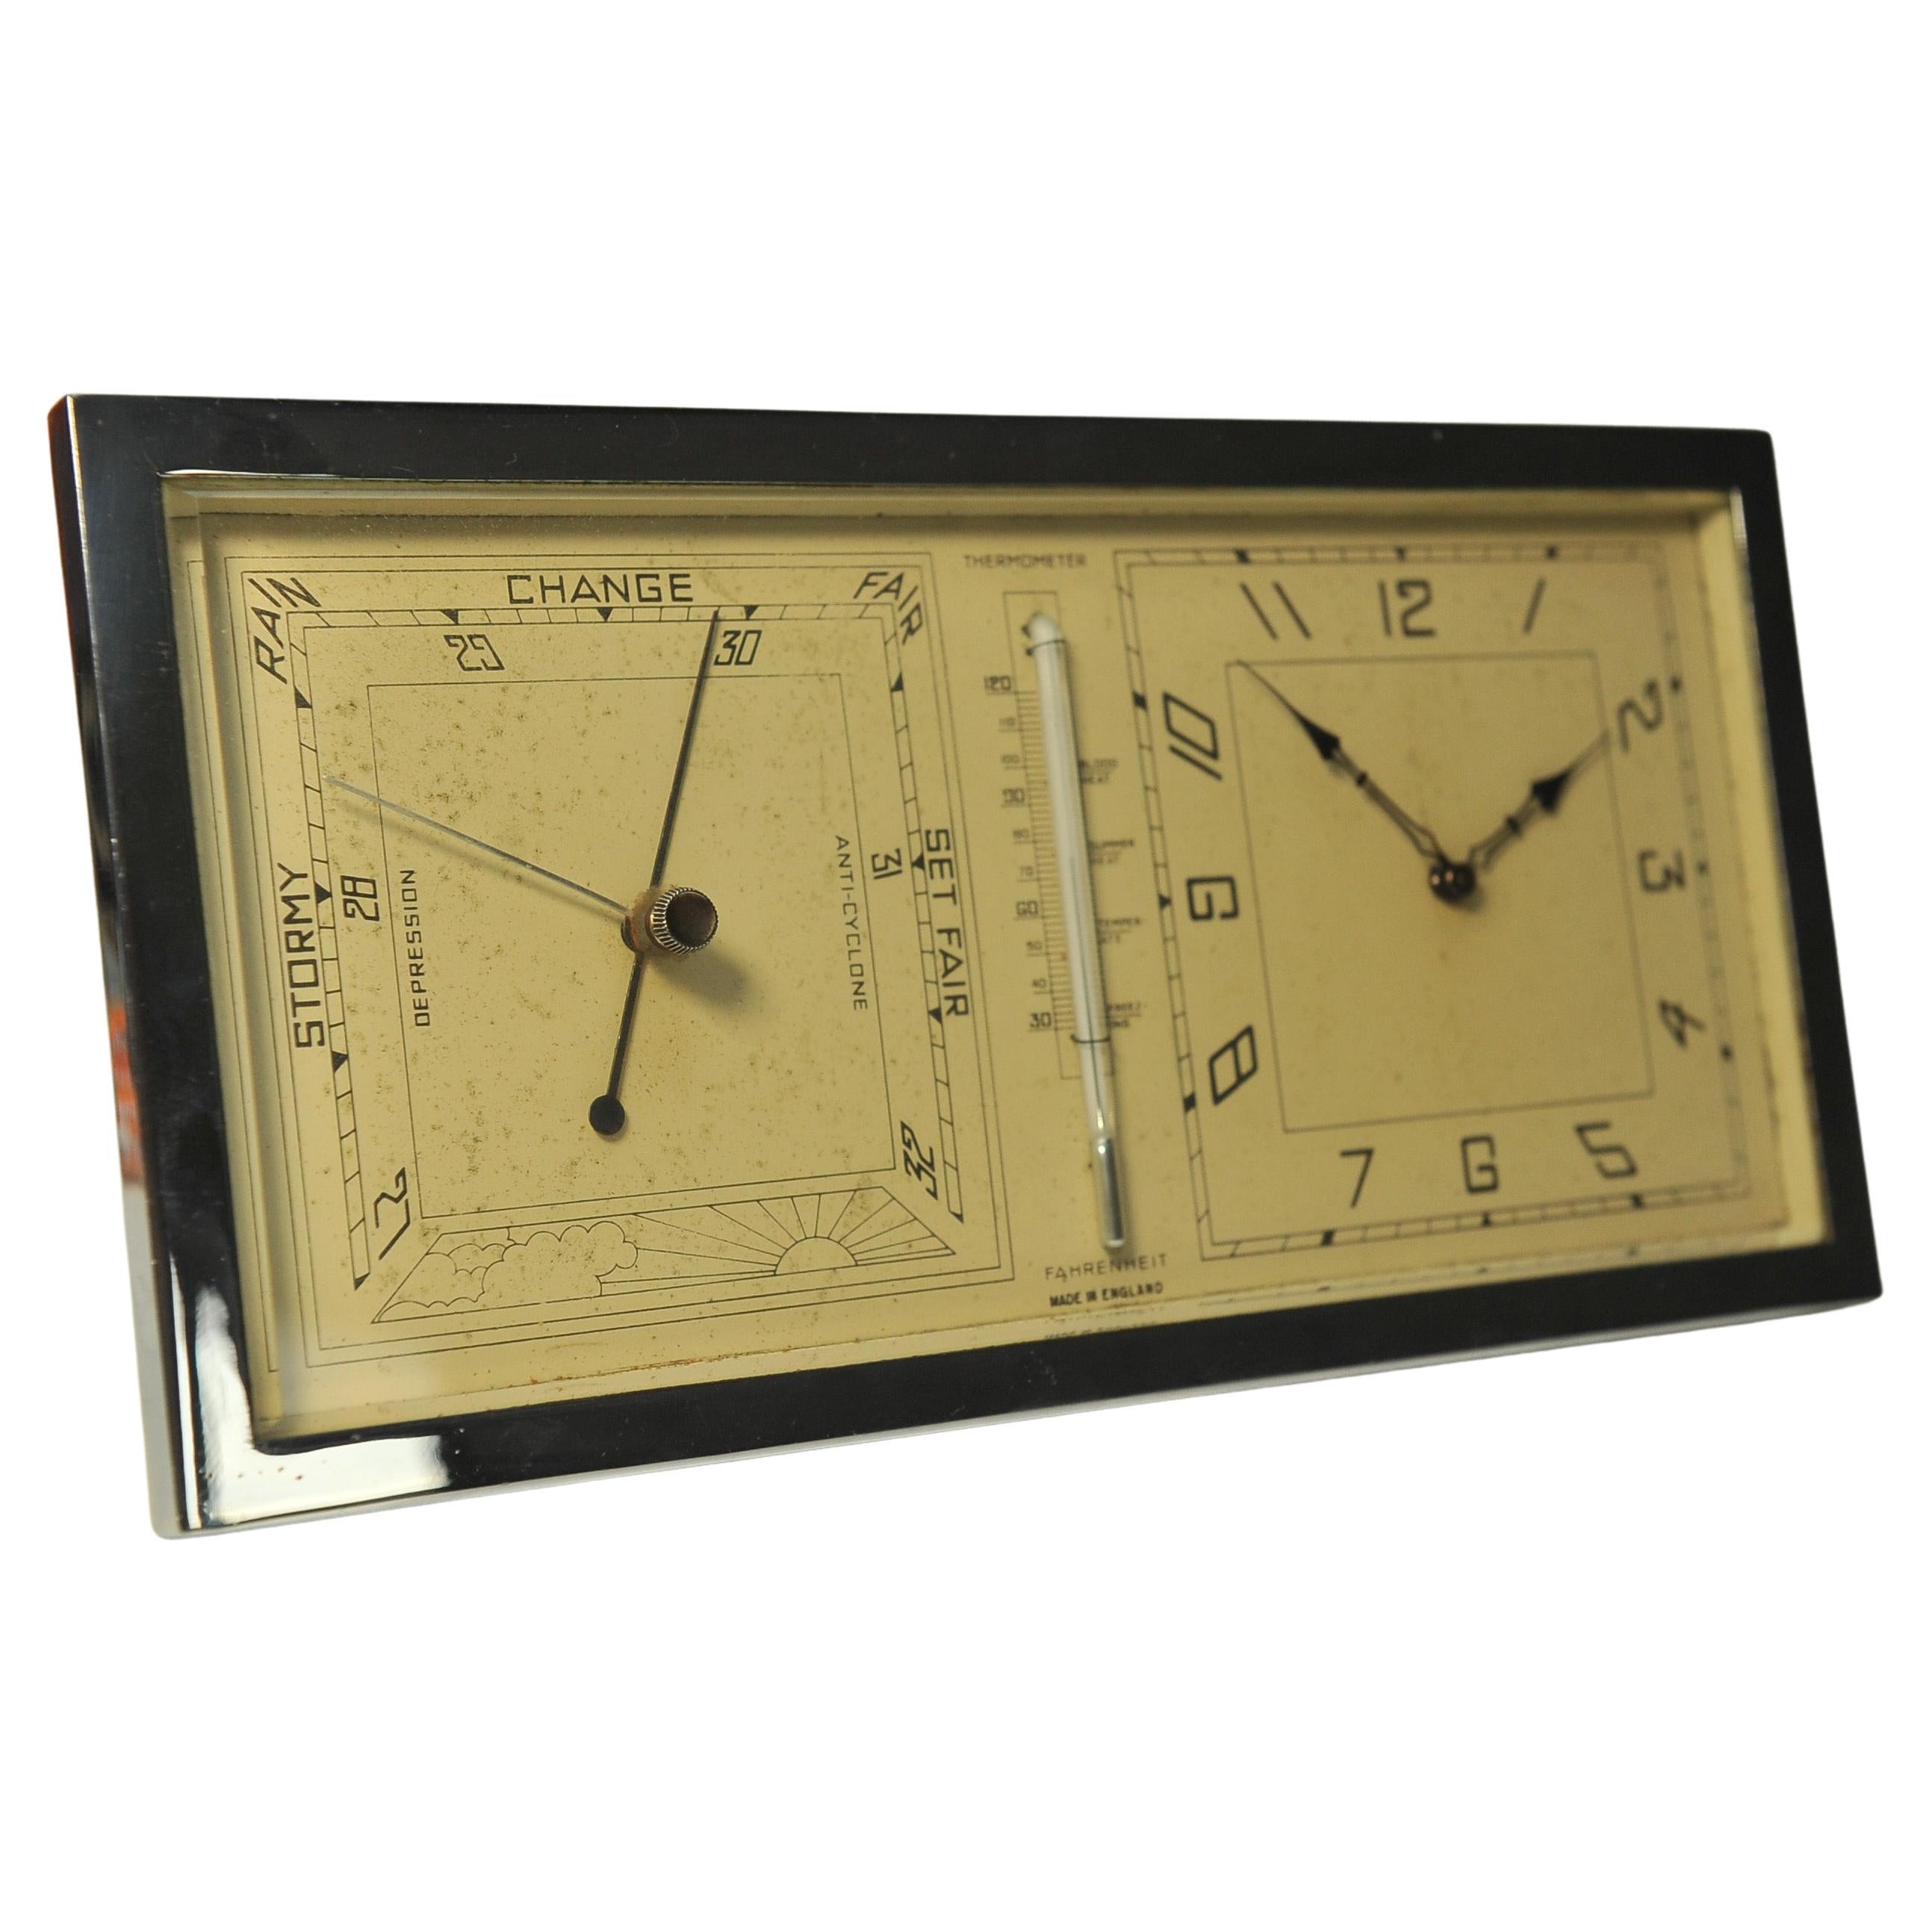 A Large Art Dec Chrome 8 Day Desk Clock With Temperature Gauge On A Stand 1930s